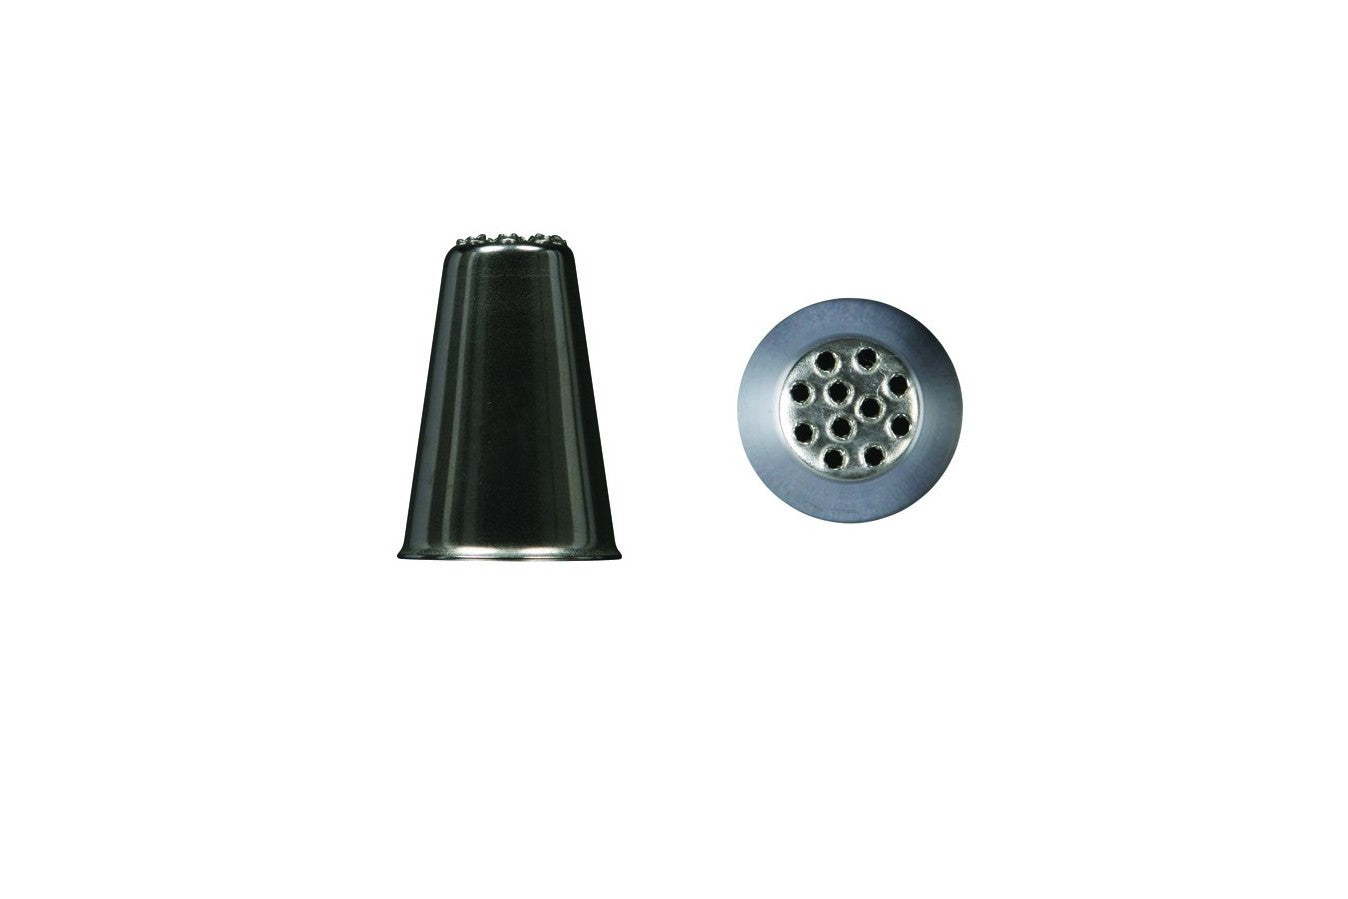 JEM - Small Grass Piping Nozzle Tip - No 233 - The Cooks Cupboard Ltd